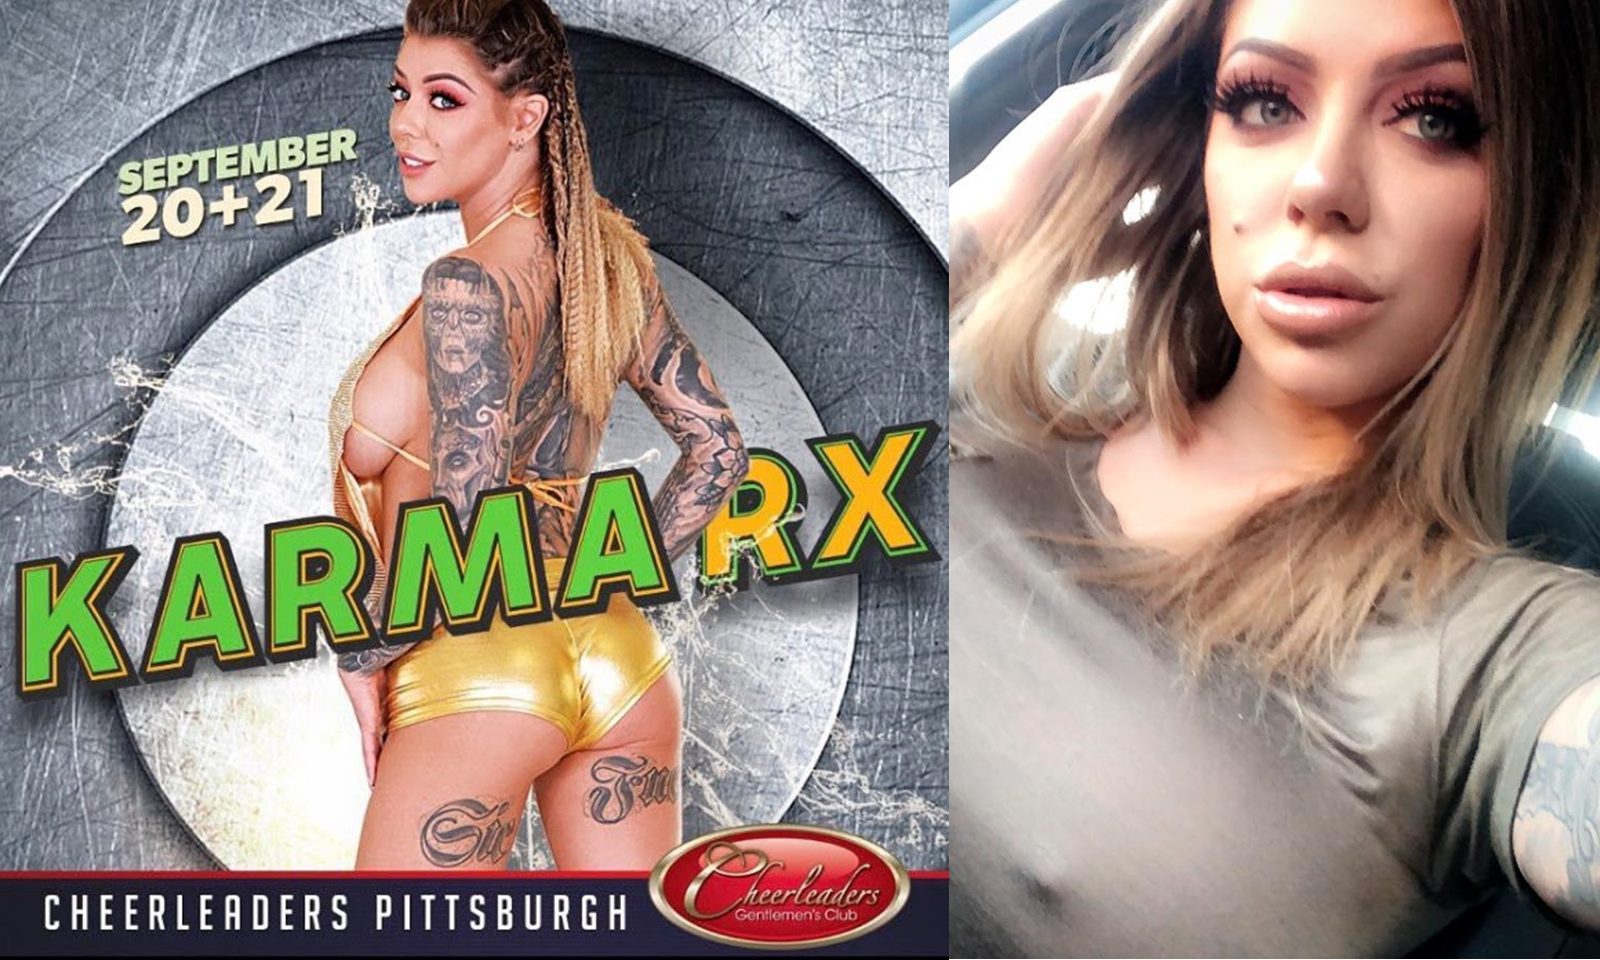 Karma Rx to Feature at Cheerleaders in Pittsburgh Sept 20-21